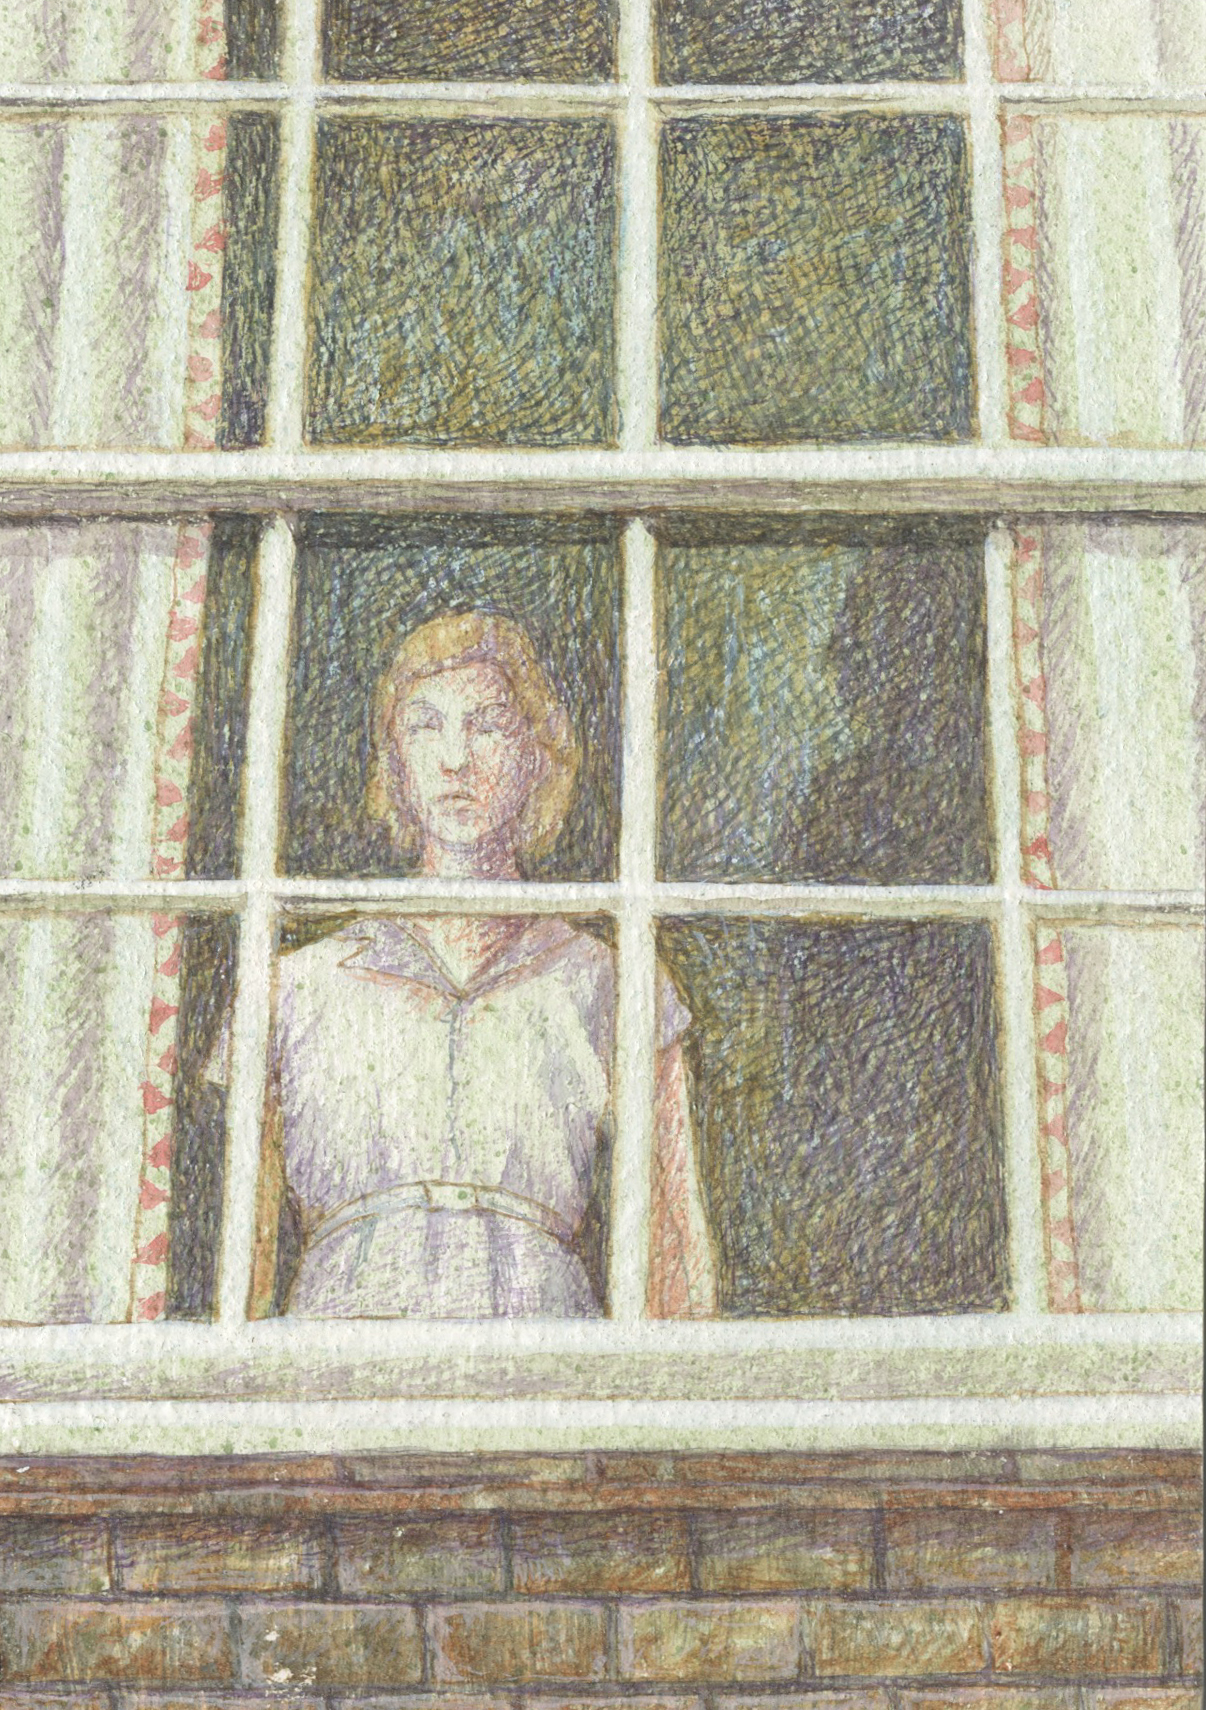 WOMAN AT A WINDOW - front